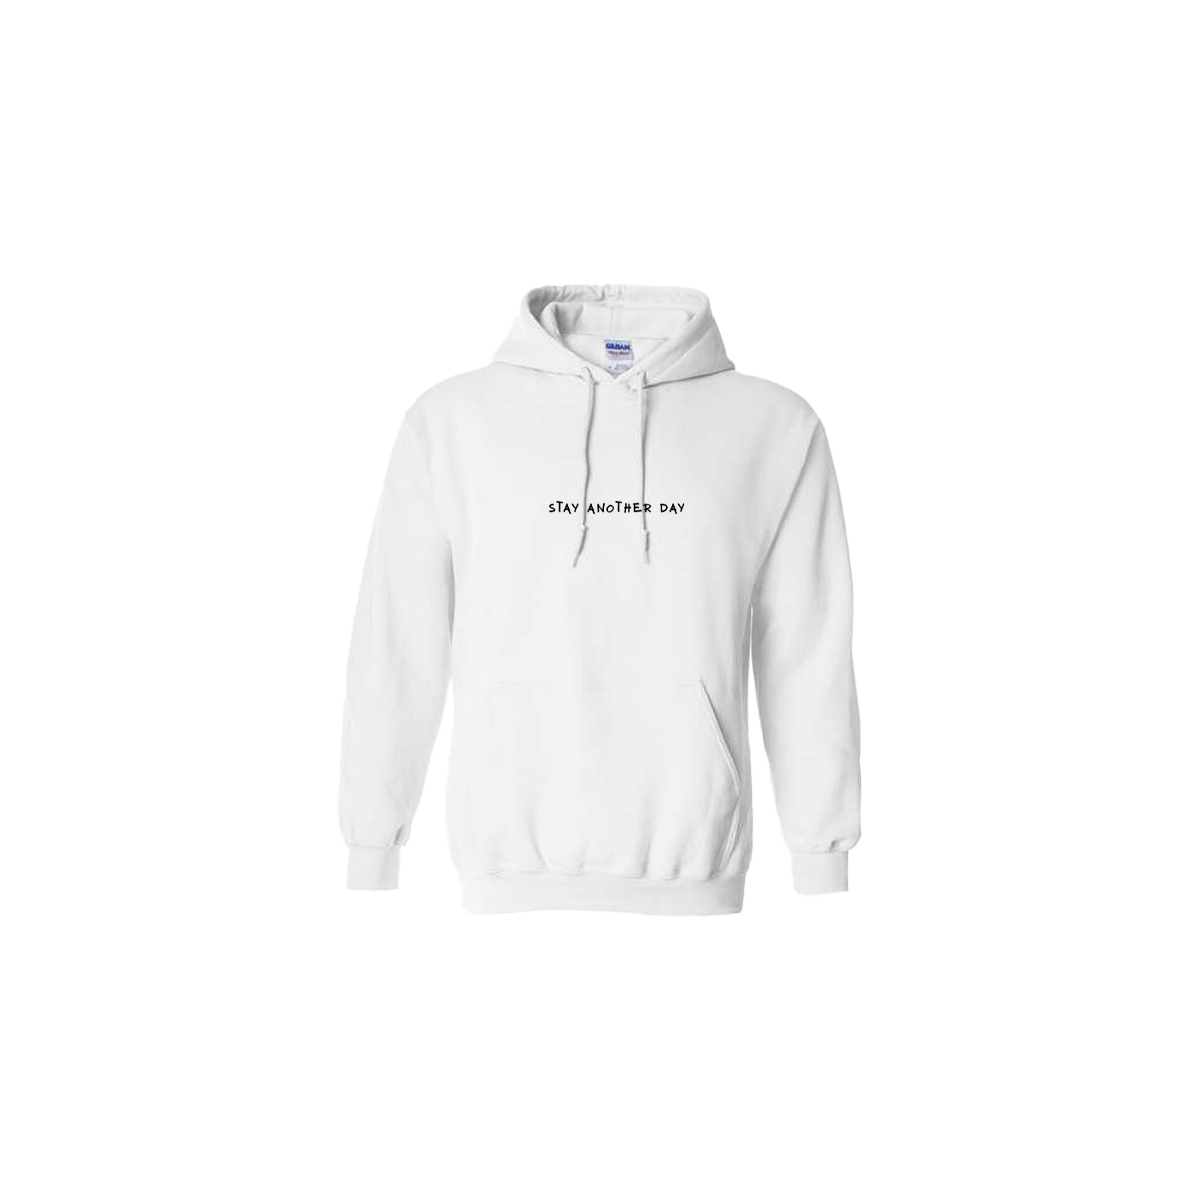 Stay Another Day Text Embroidered White Hoodie - Mental Health Awareness Clothing